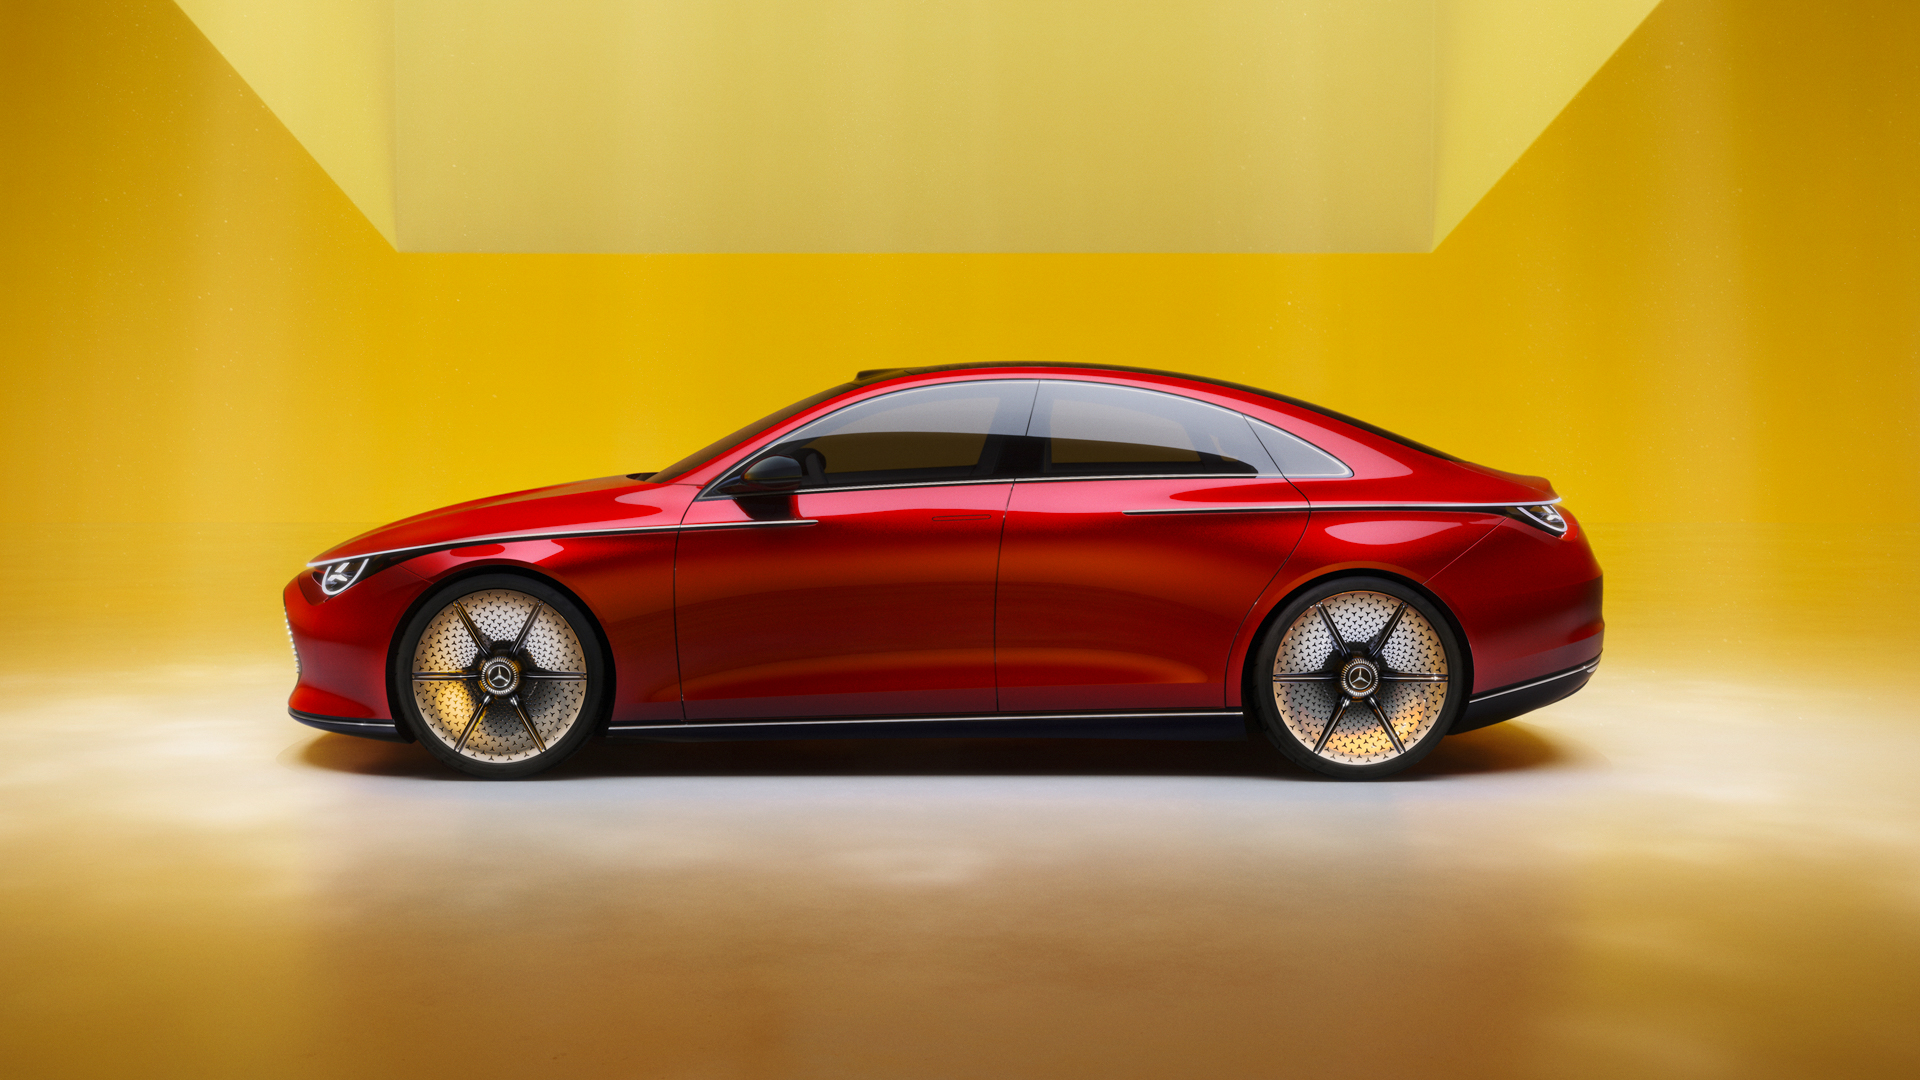 Electric Mercedes CLA Follows Porsche’s Playbook With Two-Speed Transmission